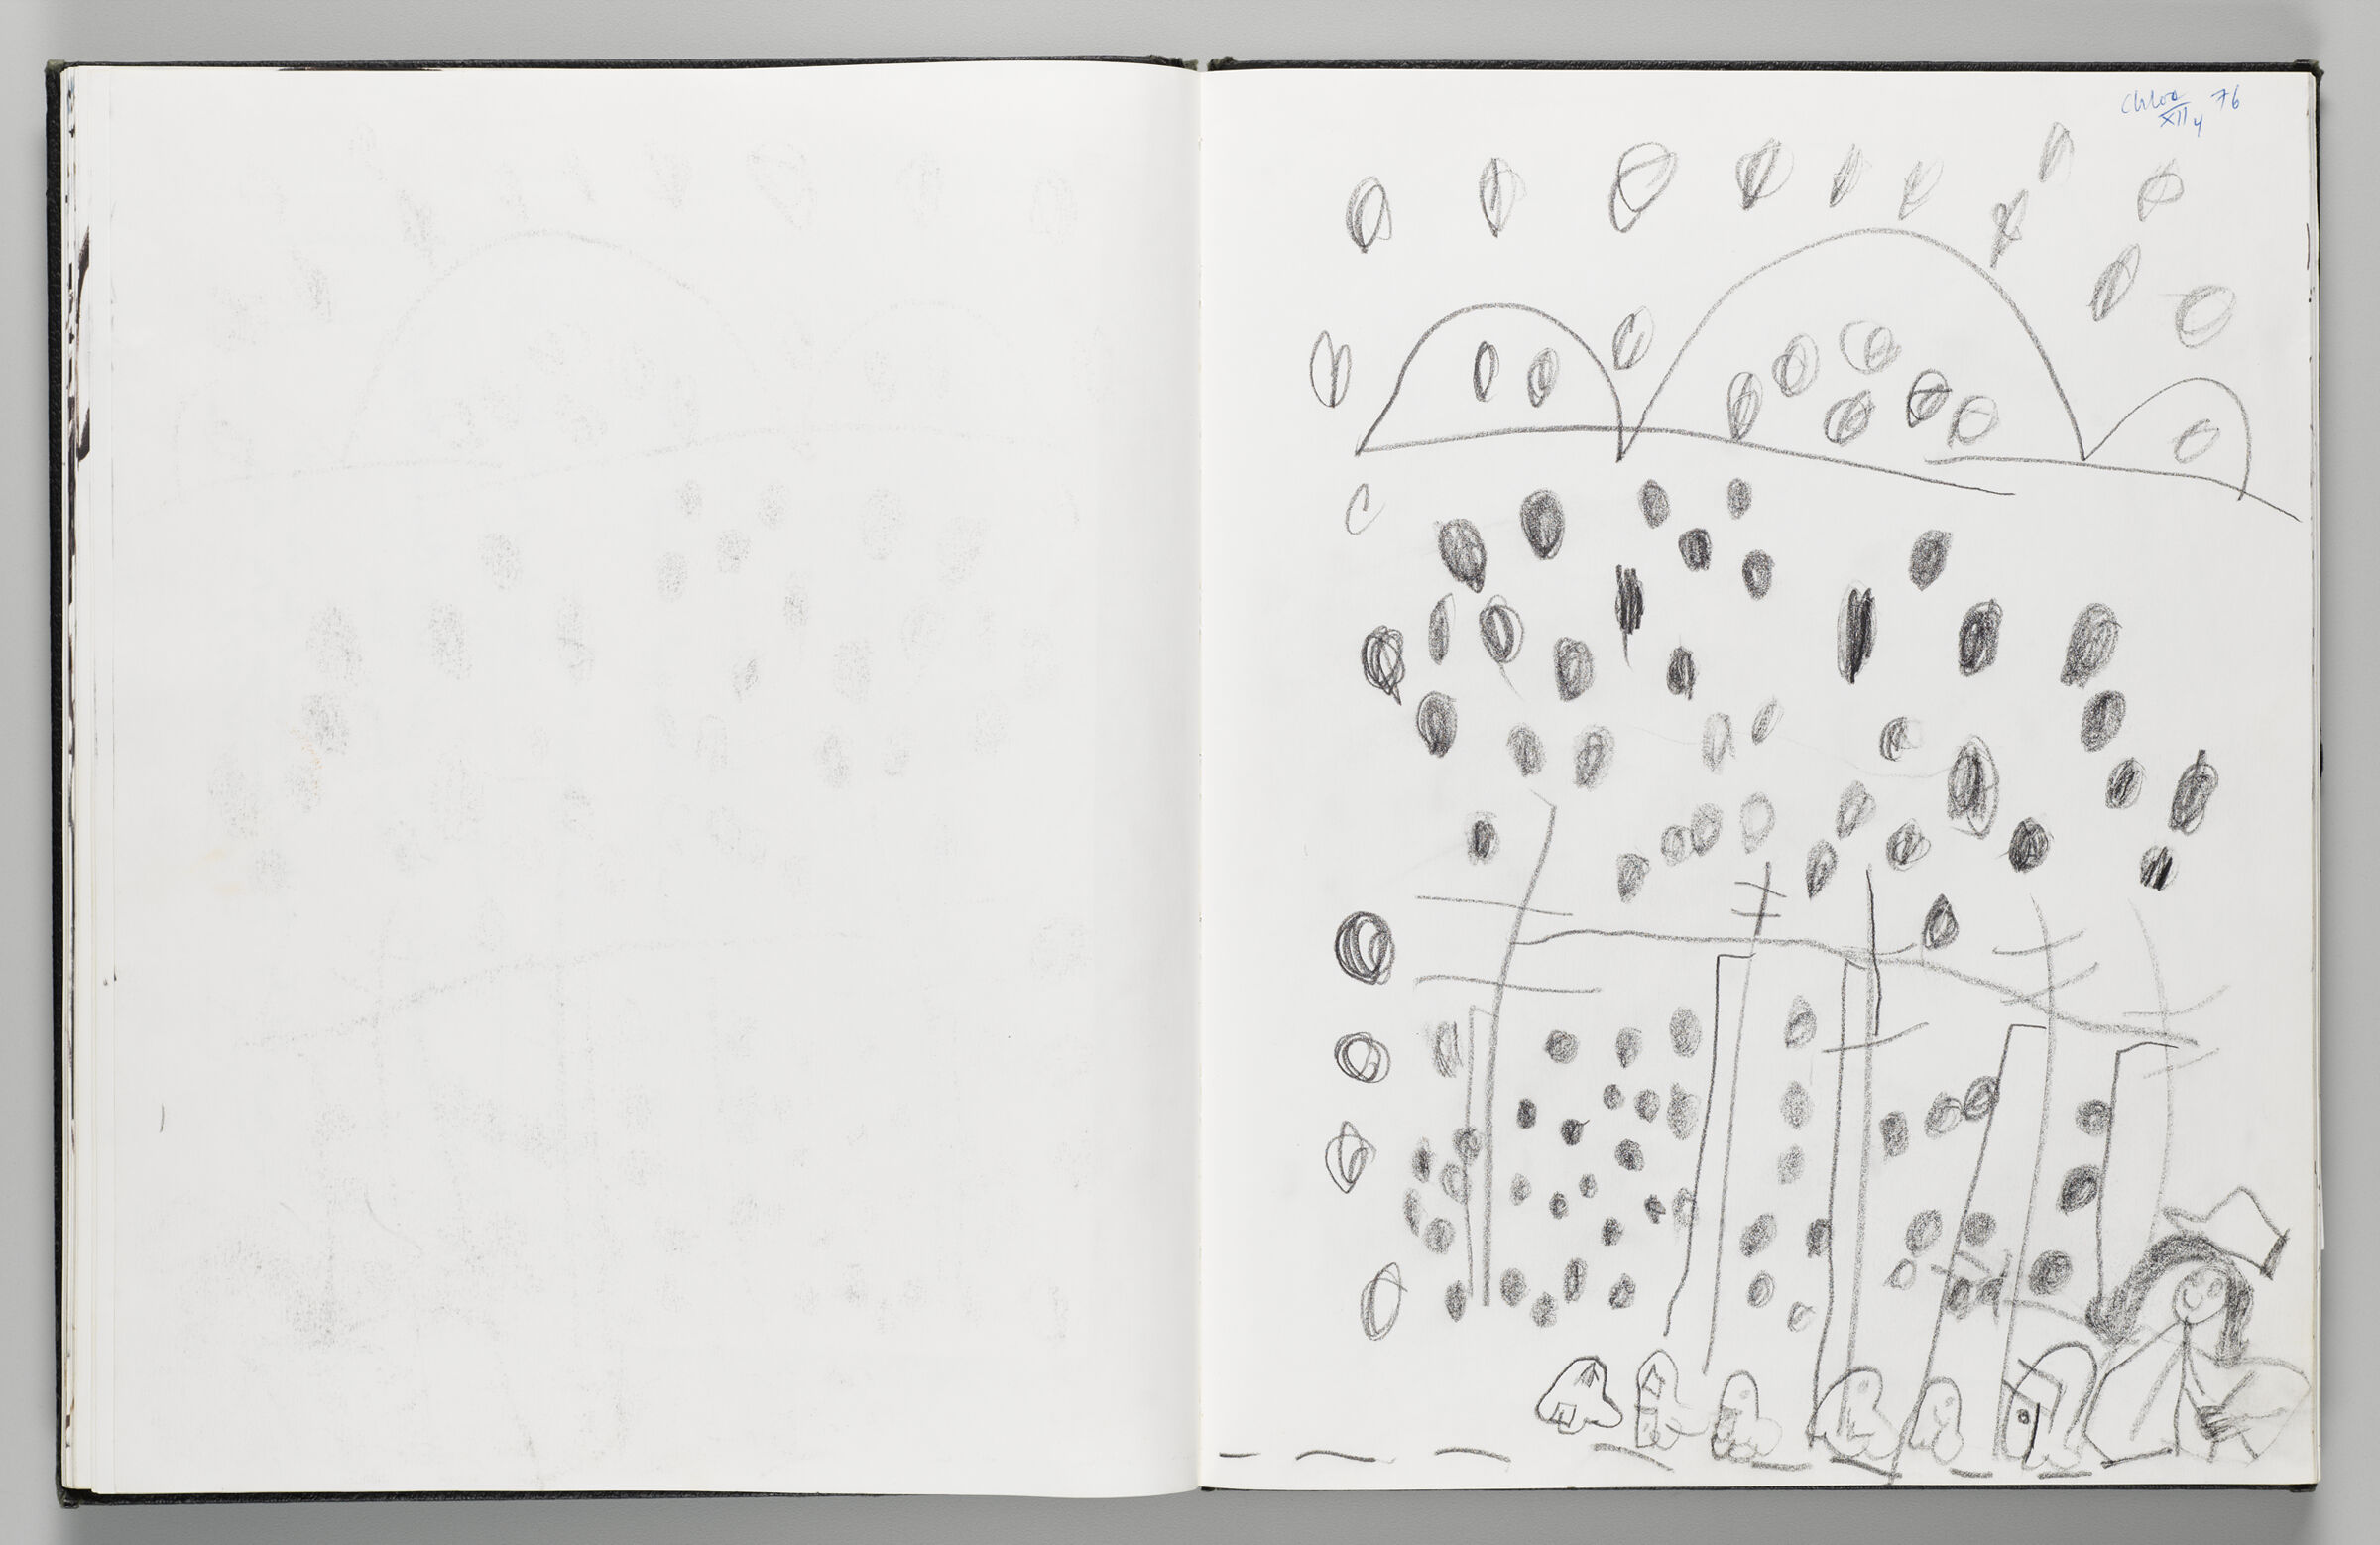 Untitled (Graphite Transfer, Left Page); Untitled (Sketch By Piene's Daughter [Chloe] Right Page)